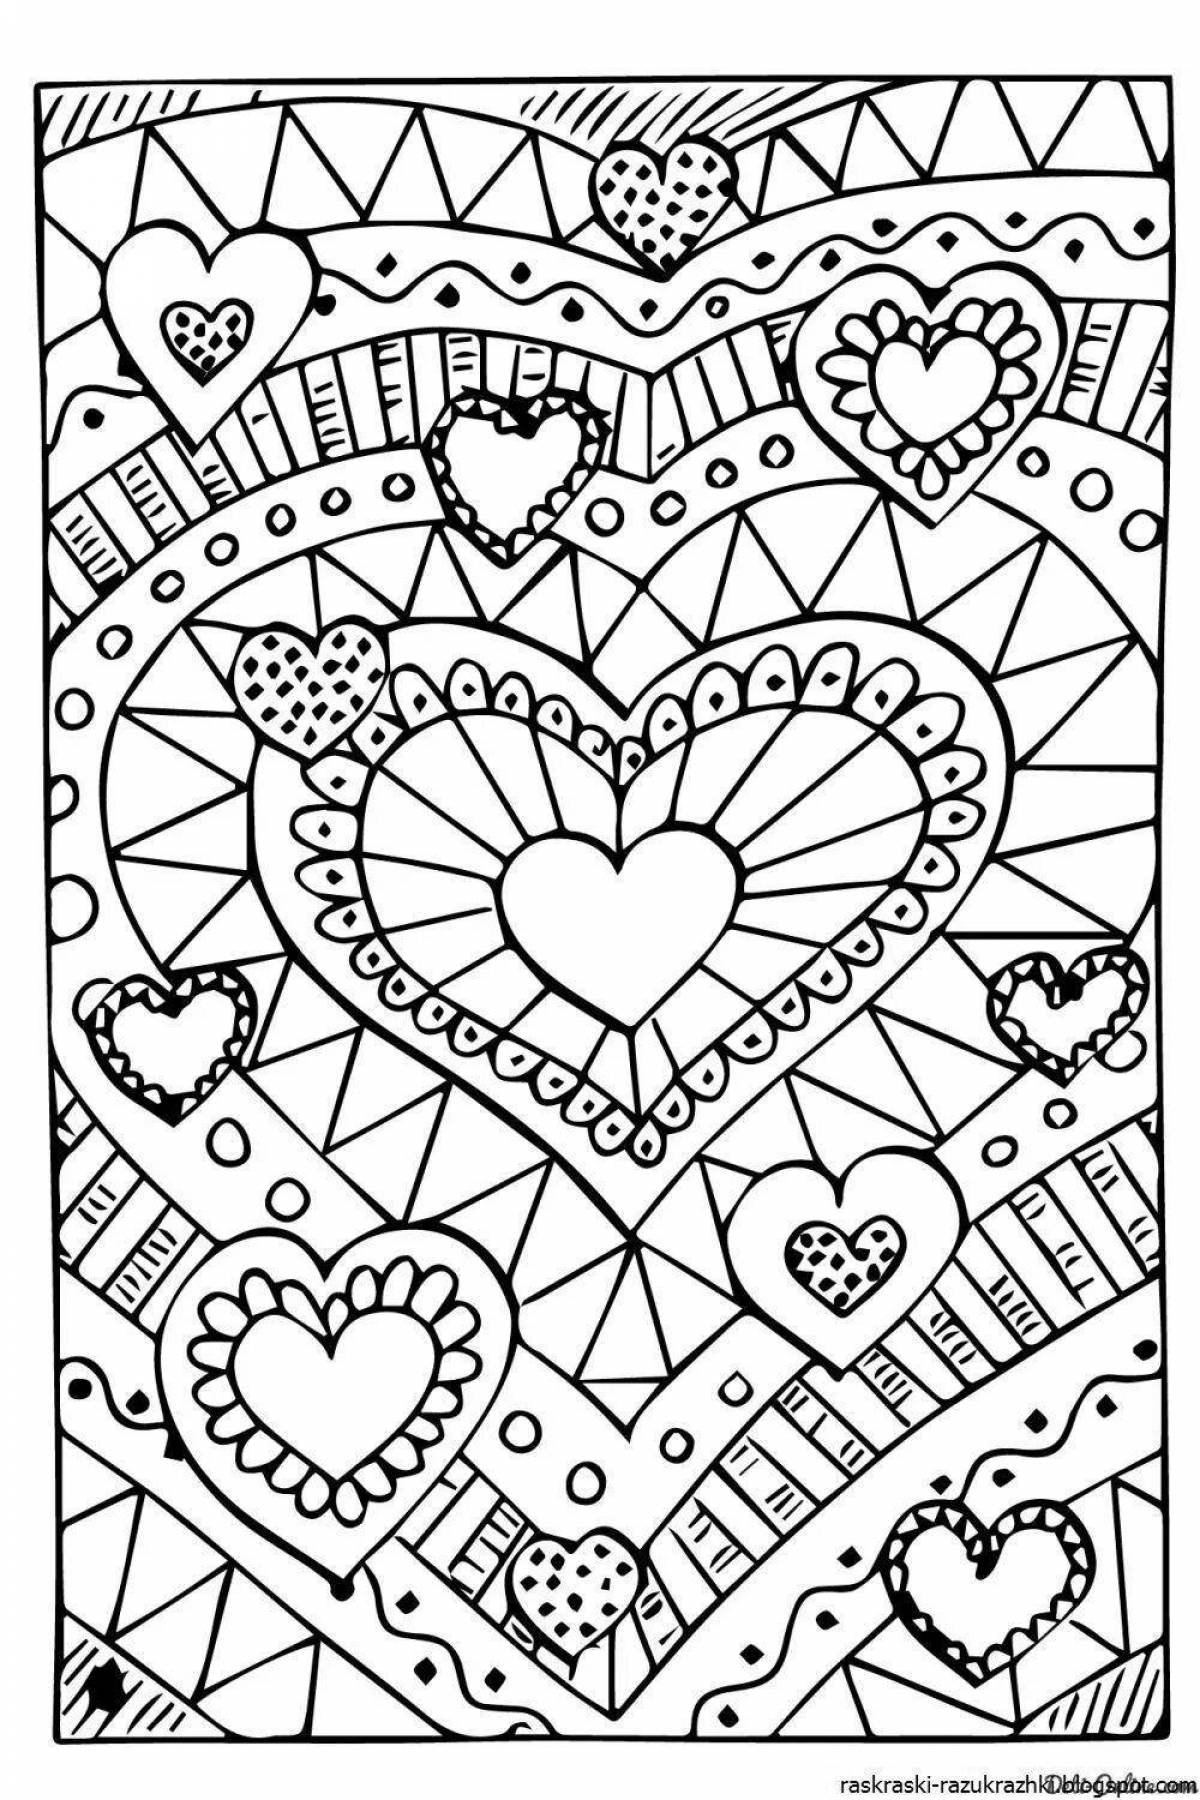 Live antistress coloring book for girls 13 years old